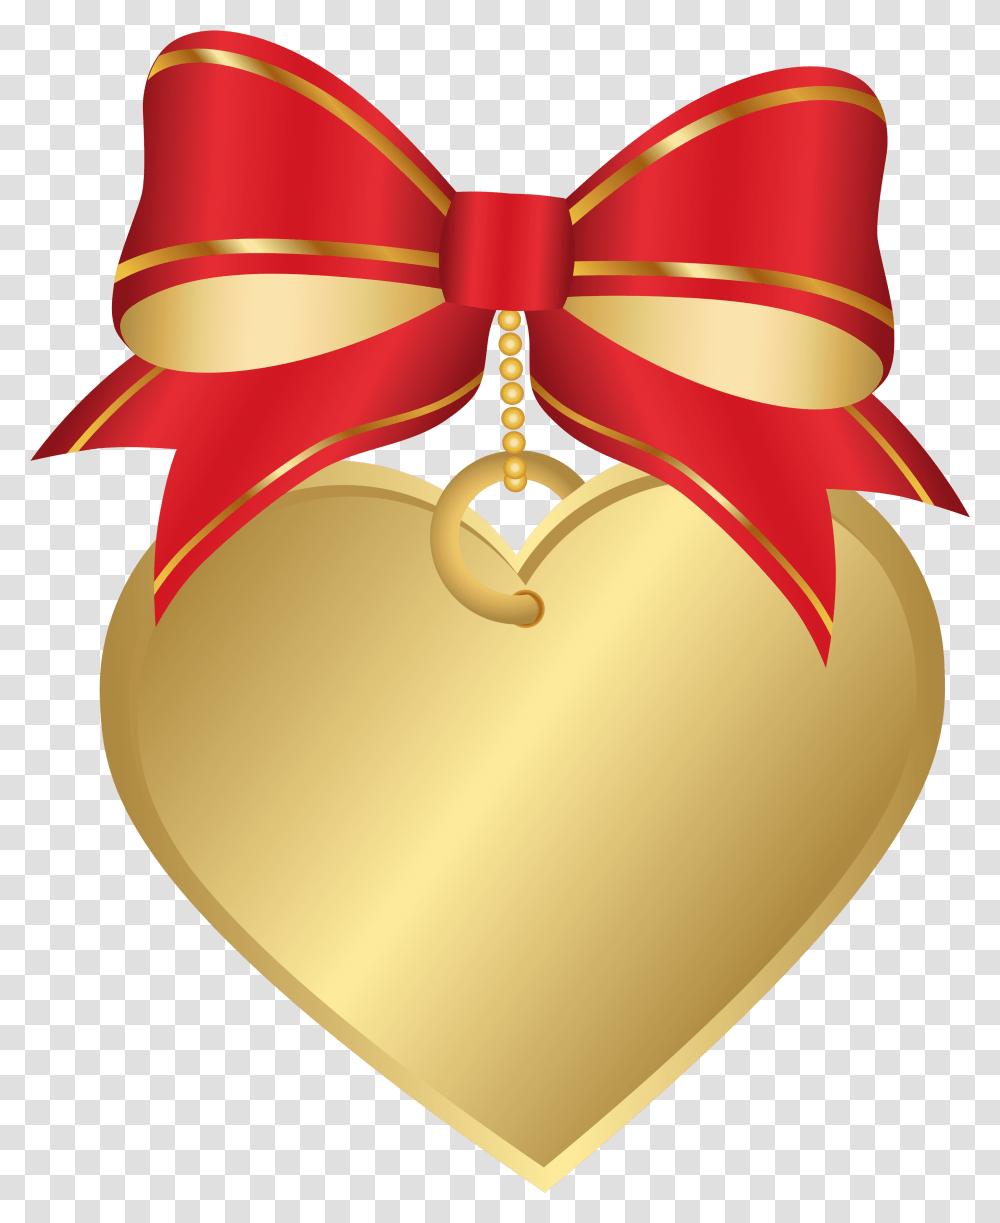 Gold Heart With Red Bow Clip Art Image Ribbon, Lamp, Plant, Label, Text Transparent Png